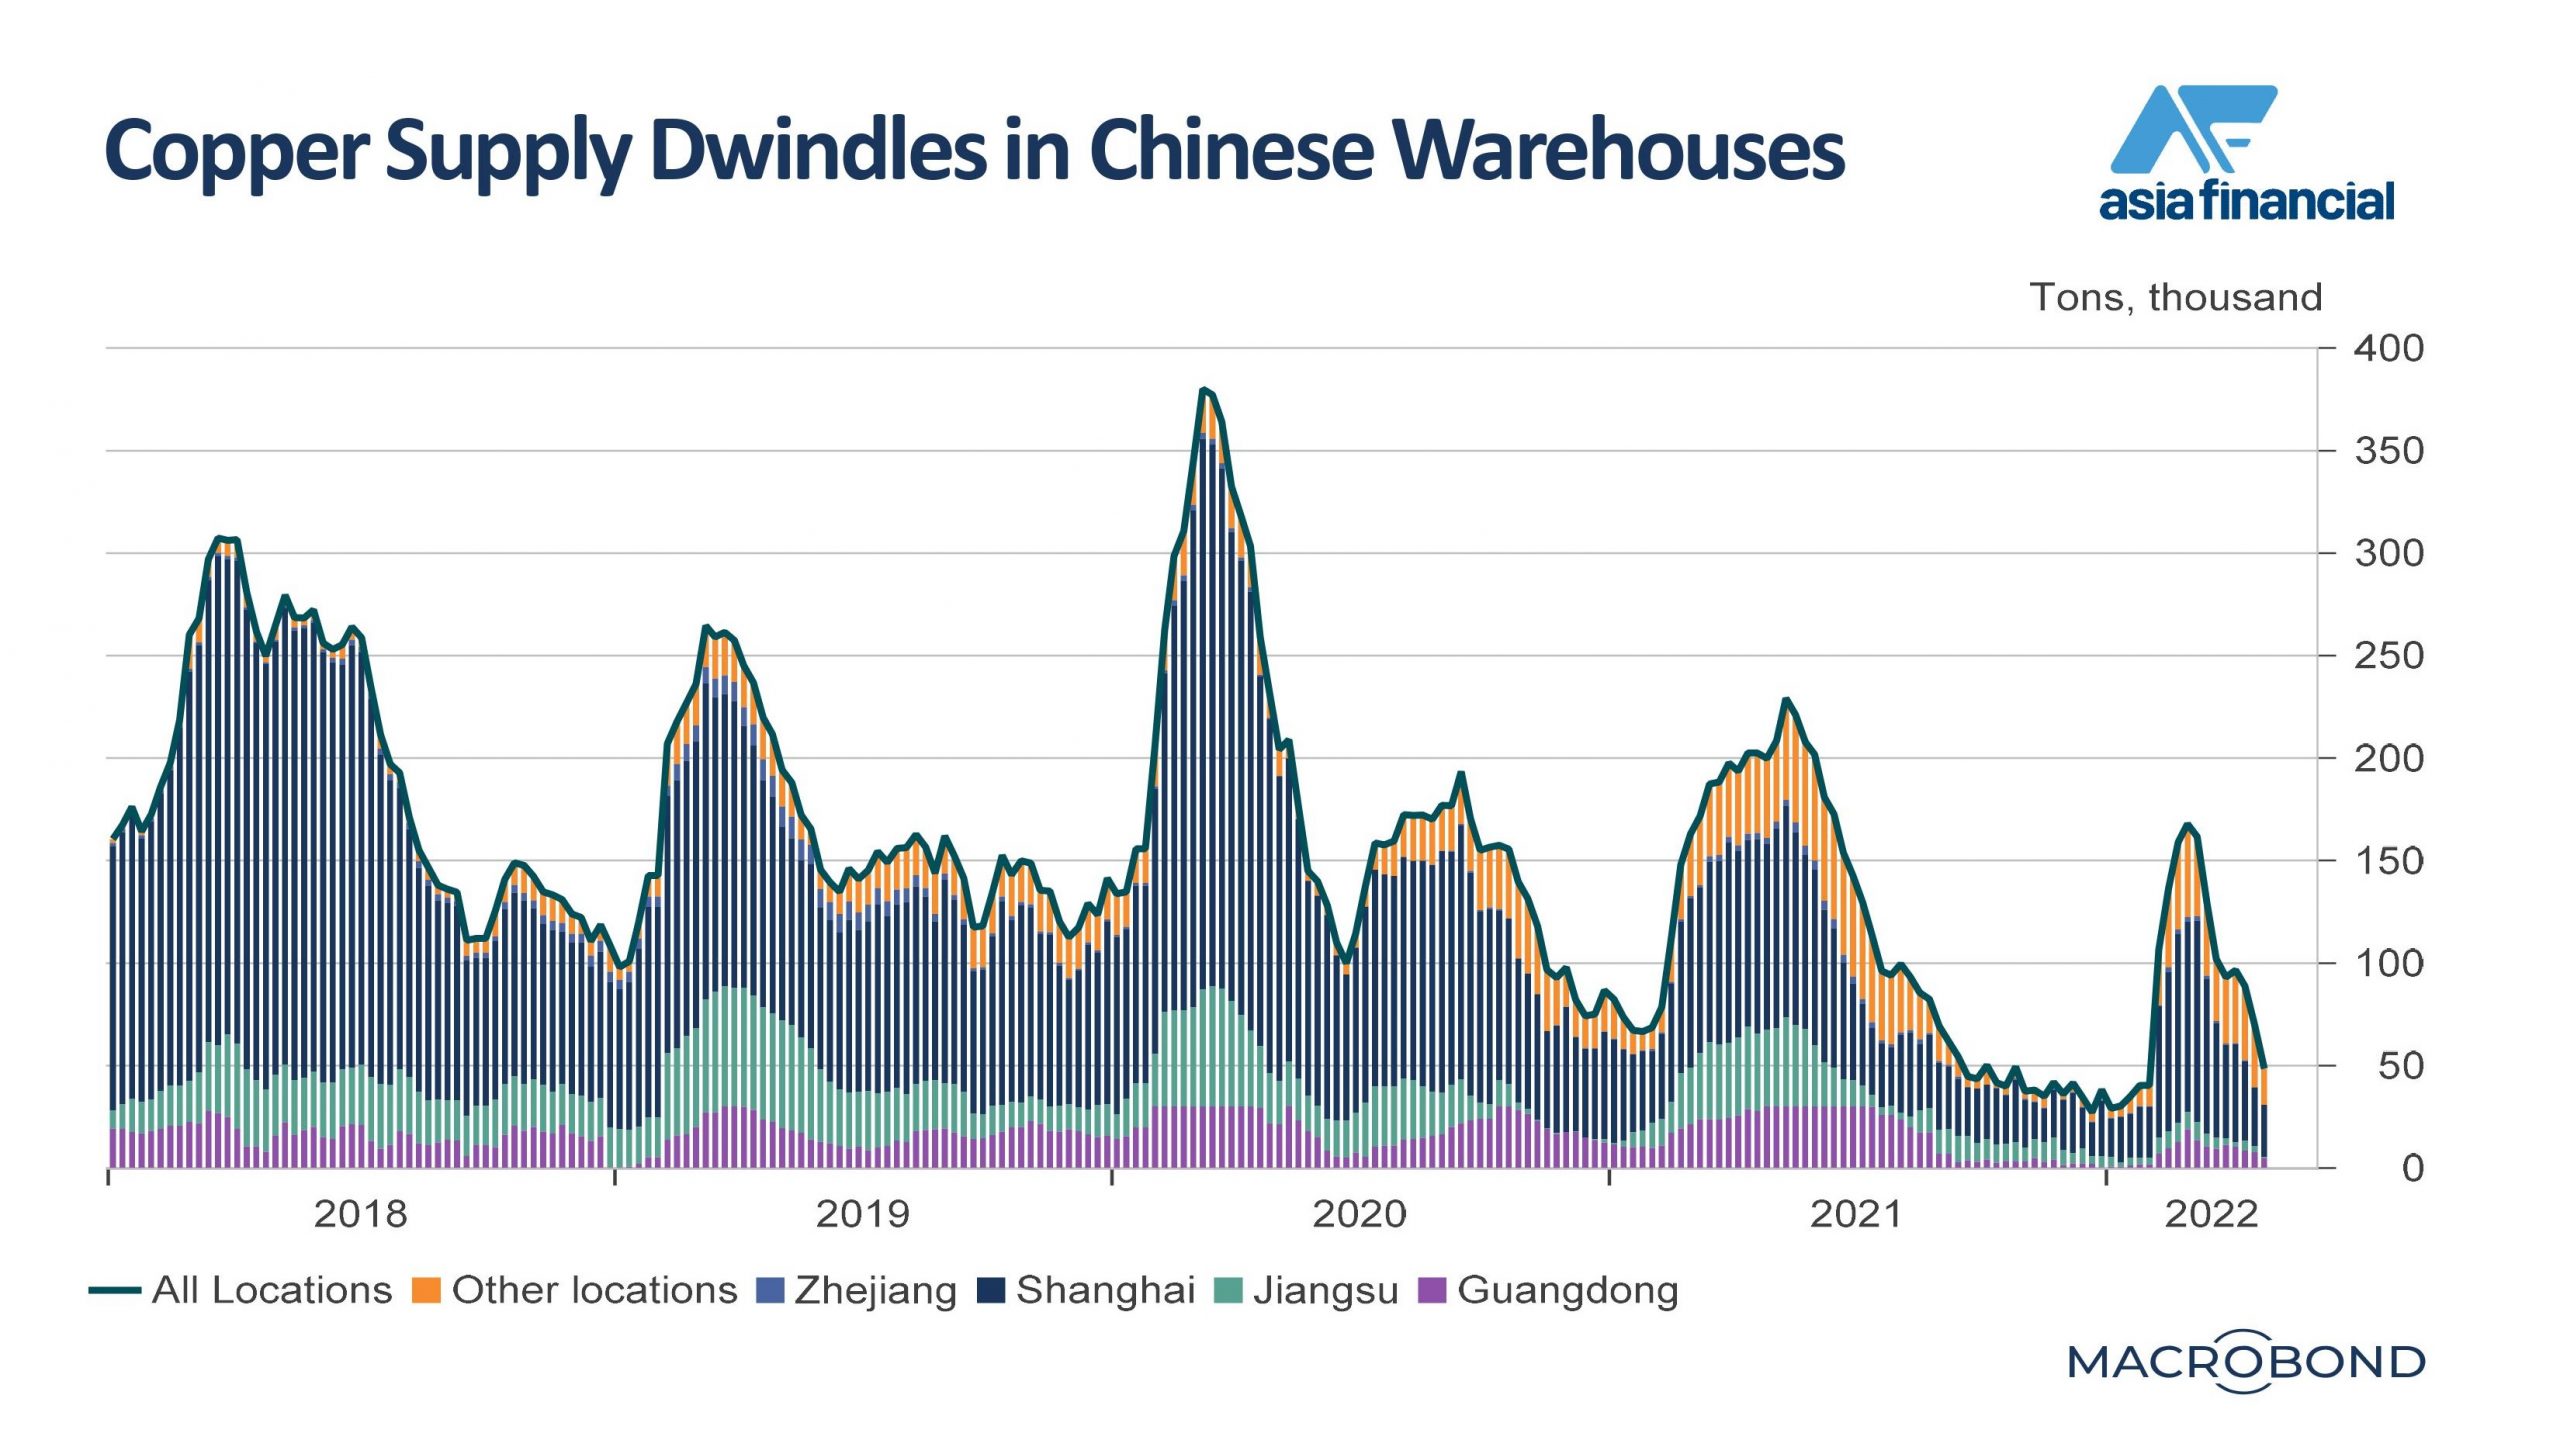 Stocks of copper in Chinese warehouses are shrinking rapidly across all locations following a top-up in supply at the start of 2022.